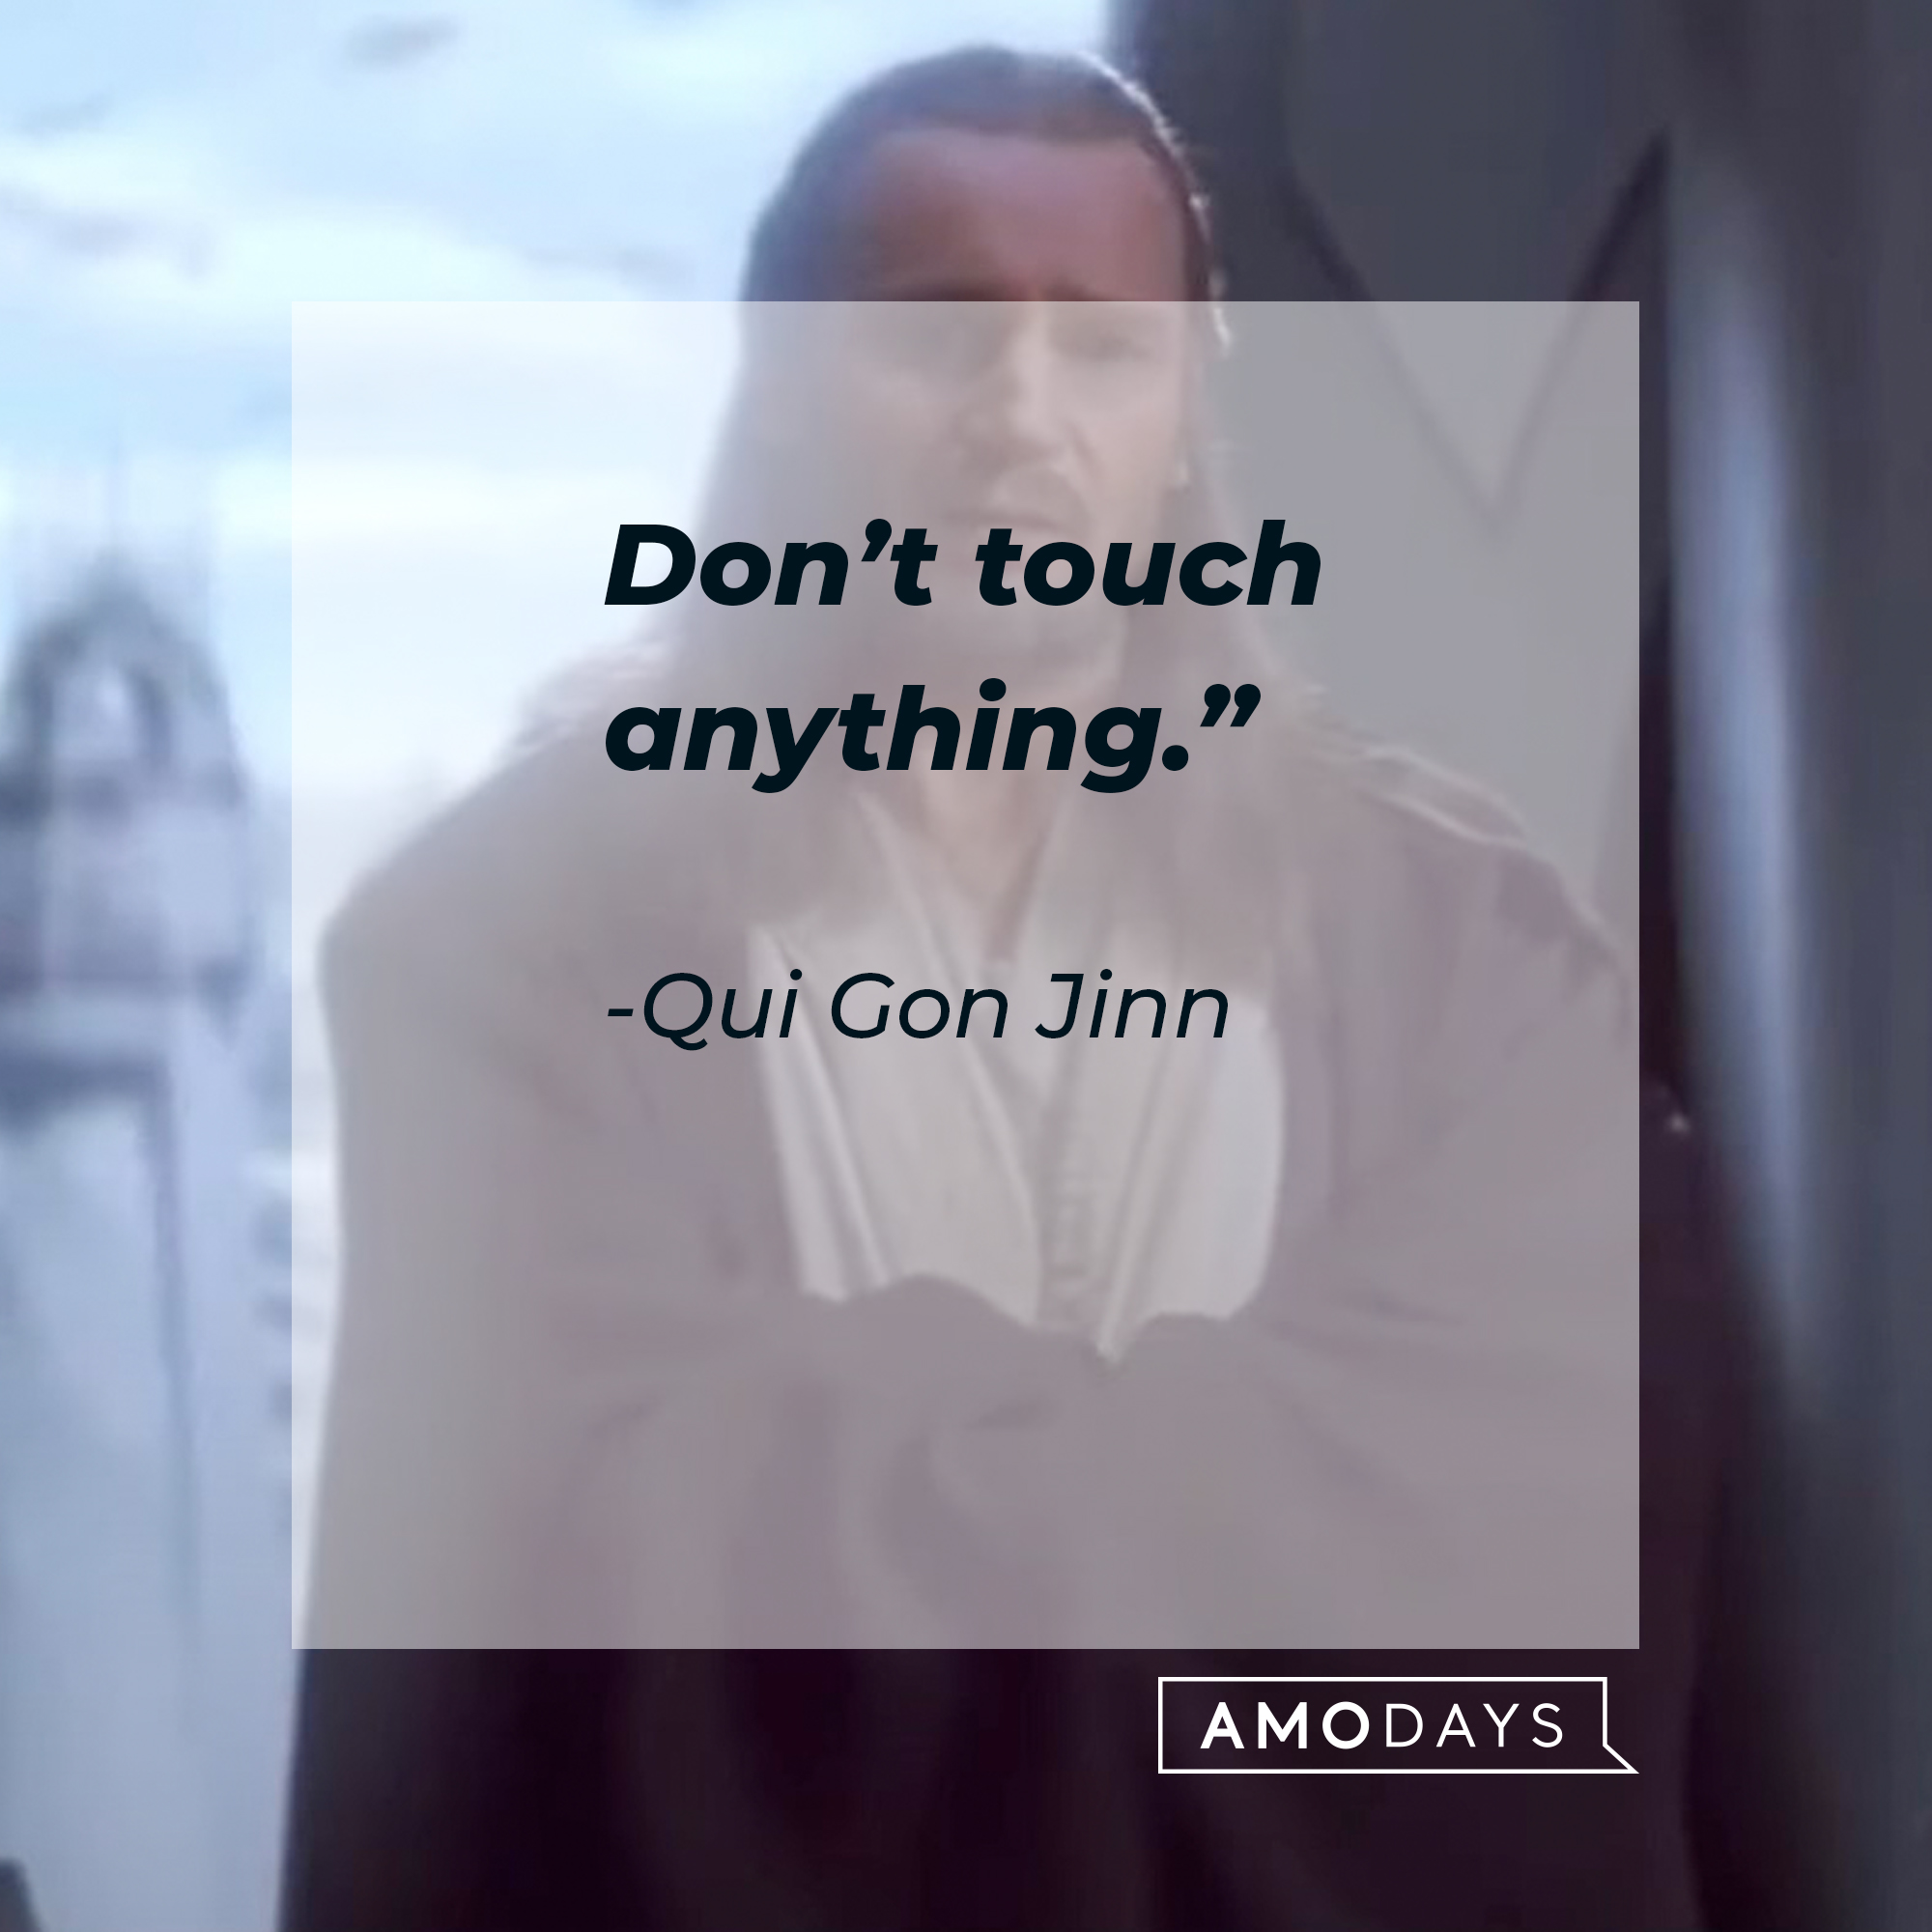 A picture of Qui Gon Jinn with a quote by him: “Don’t touch anything.” | Source: facebook.com/StarWars